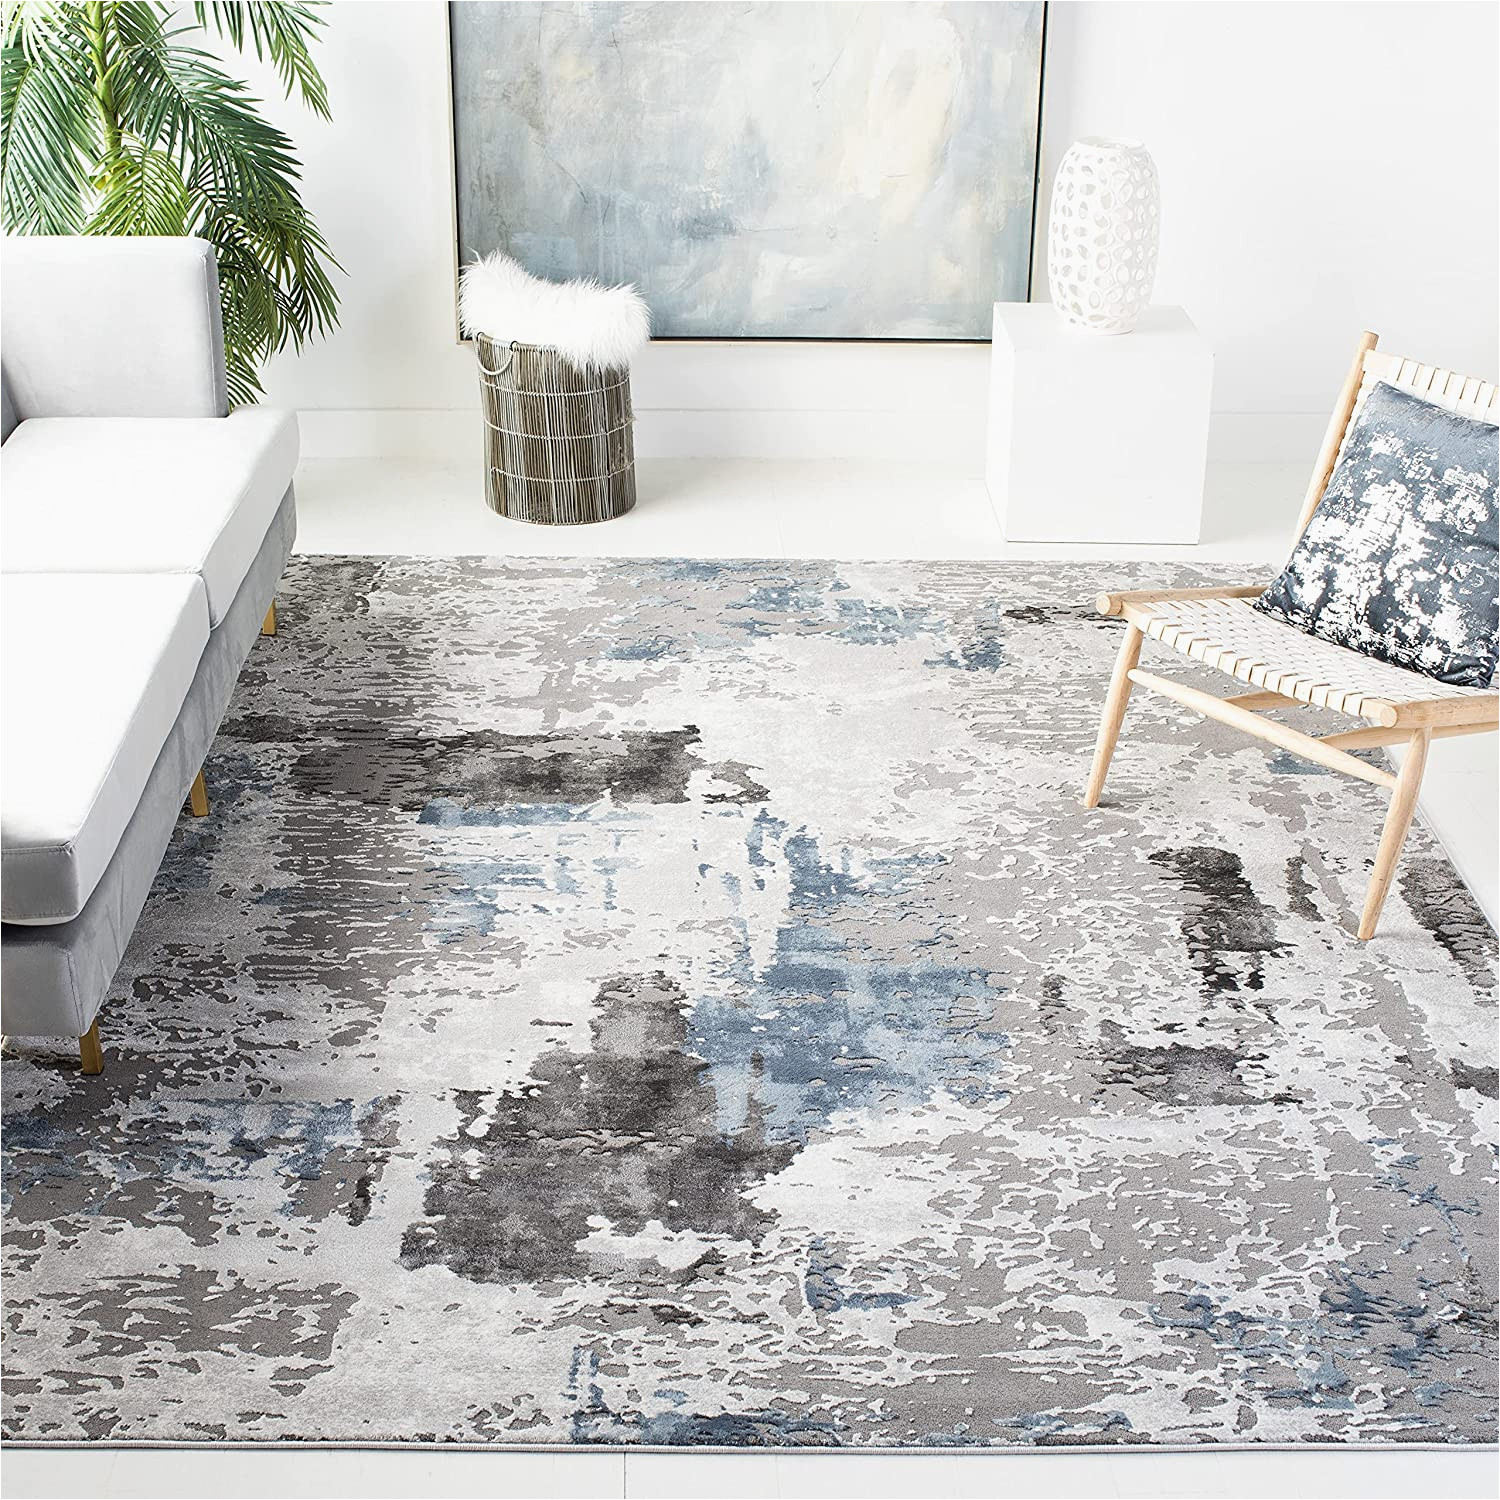 12 X 15 area Rugs Sale Large area Rugs 12 X 15 for Sale Online Abstract Industrial Decor …